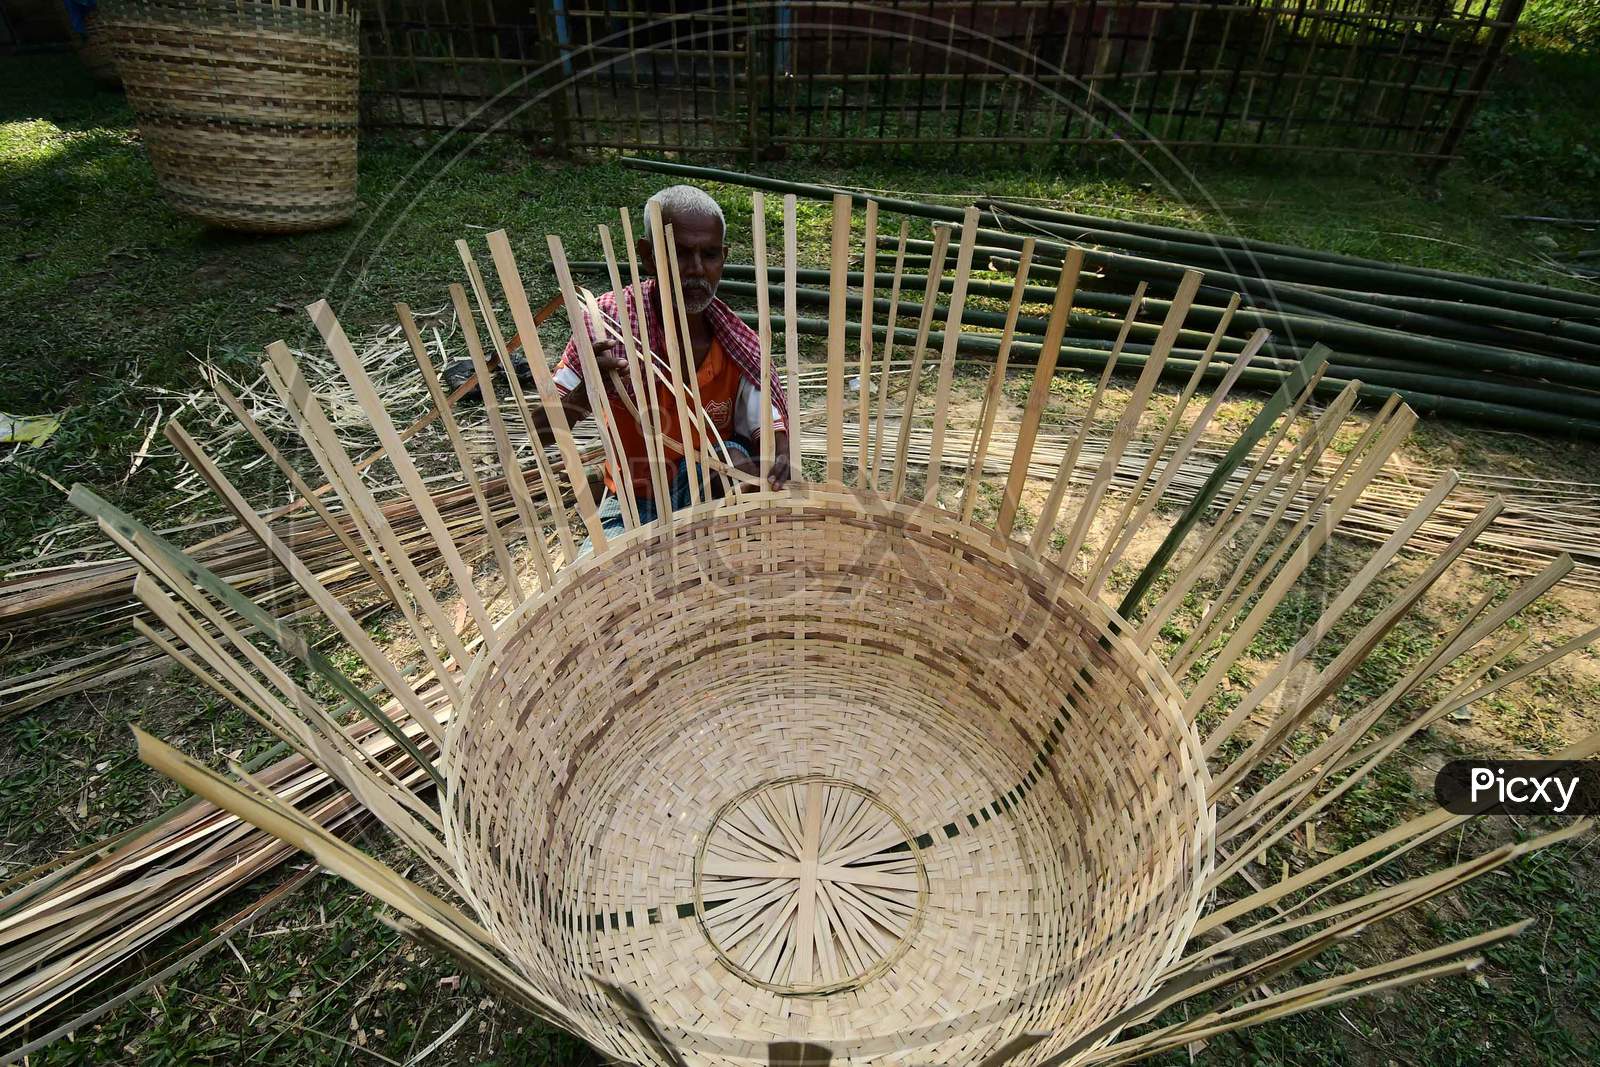 Villagers made Bamboo bucket locally called Duli at a village in Nagaon District of Assam on Nov 18,2020.